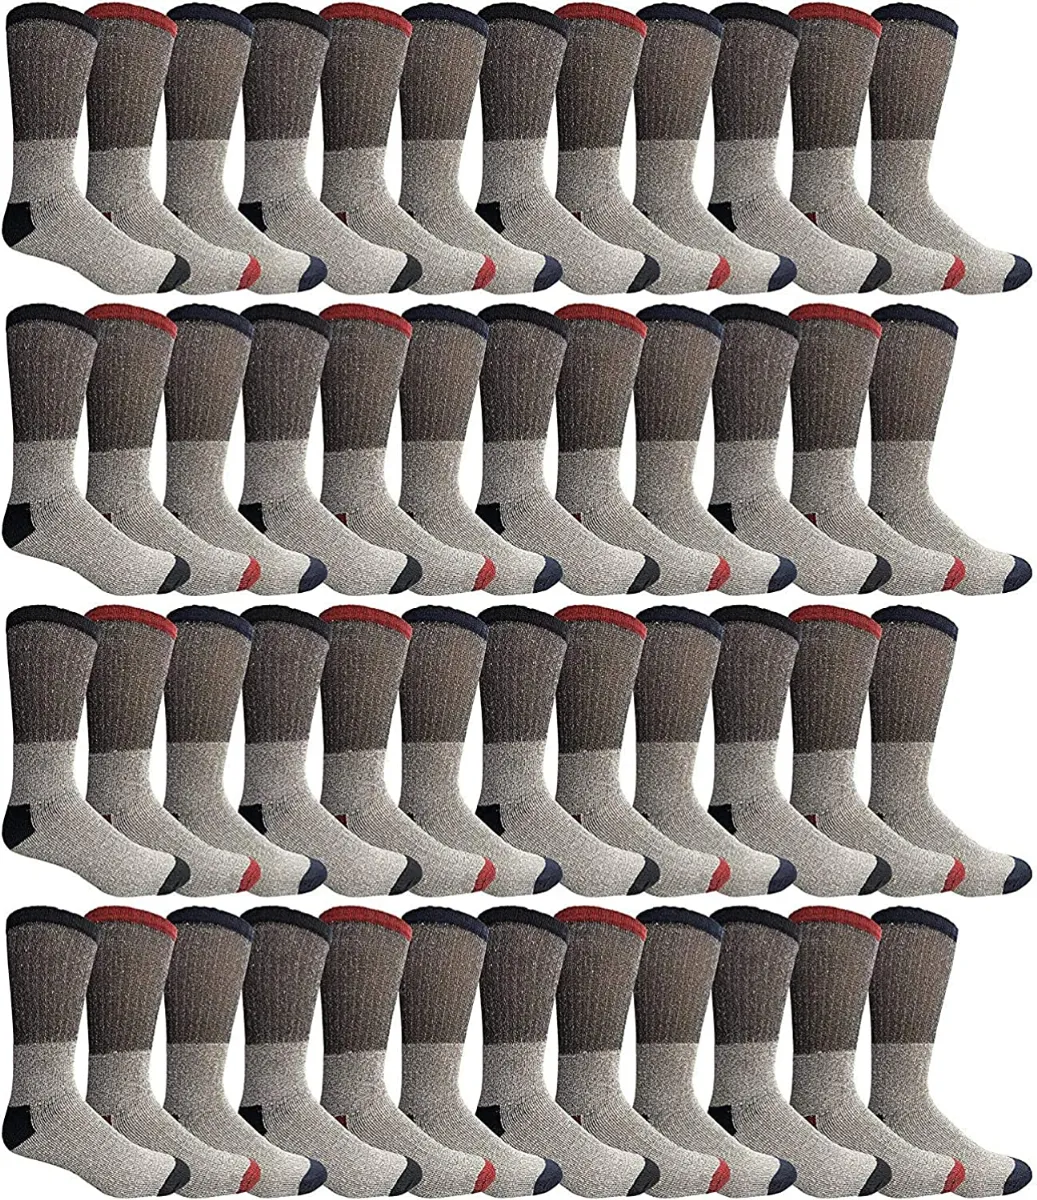 60 Wholesale Kids Thermal Boot Socks, Bulk Pack Thick Warm Winter Extreme Weather Sock Size 6-8